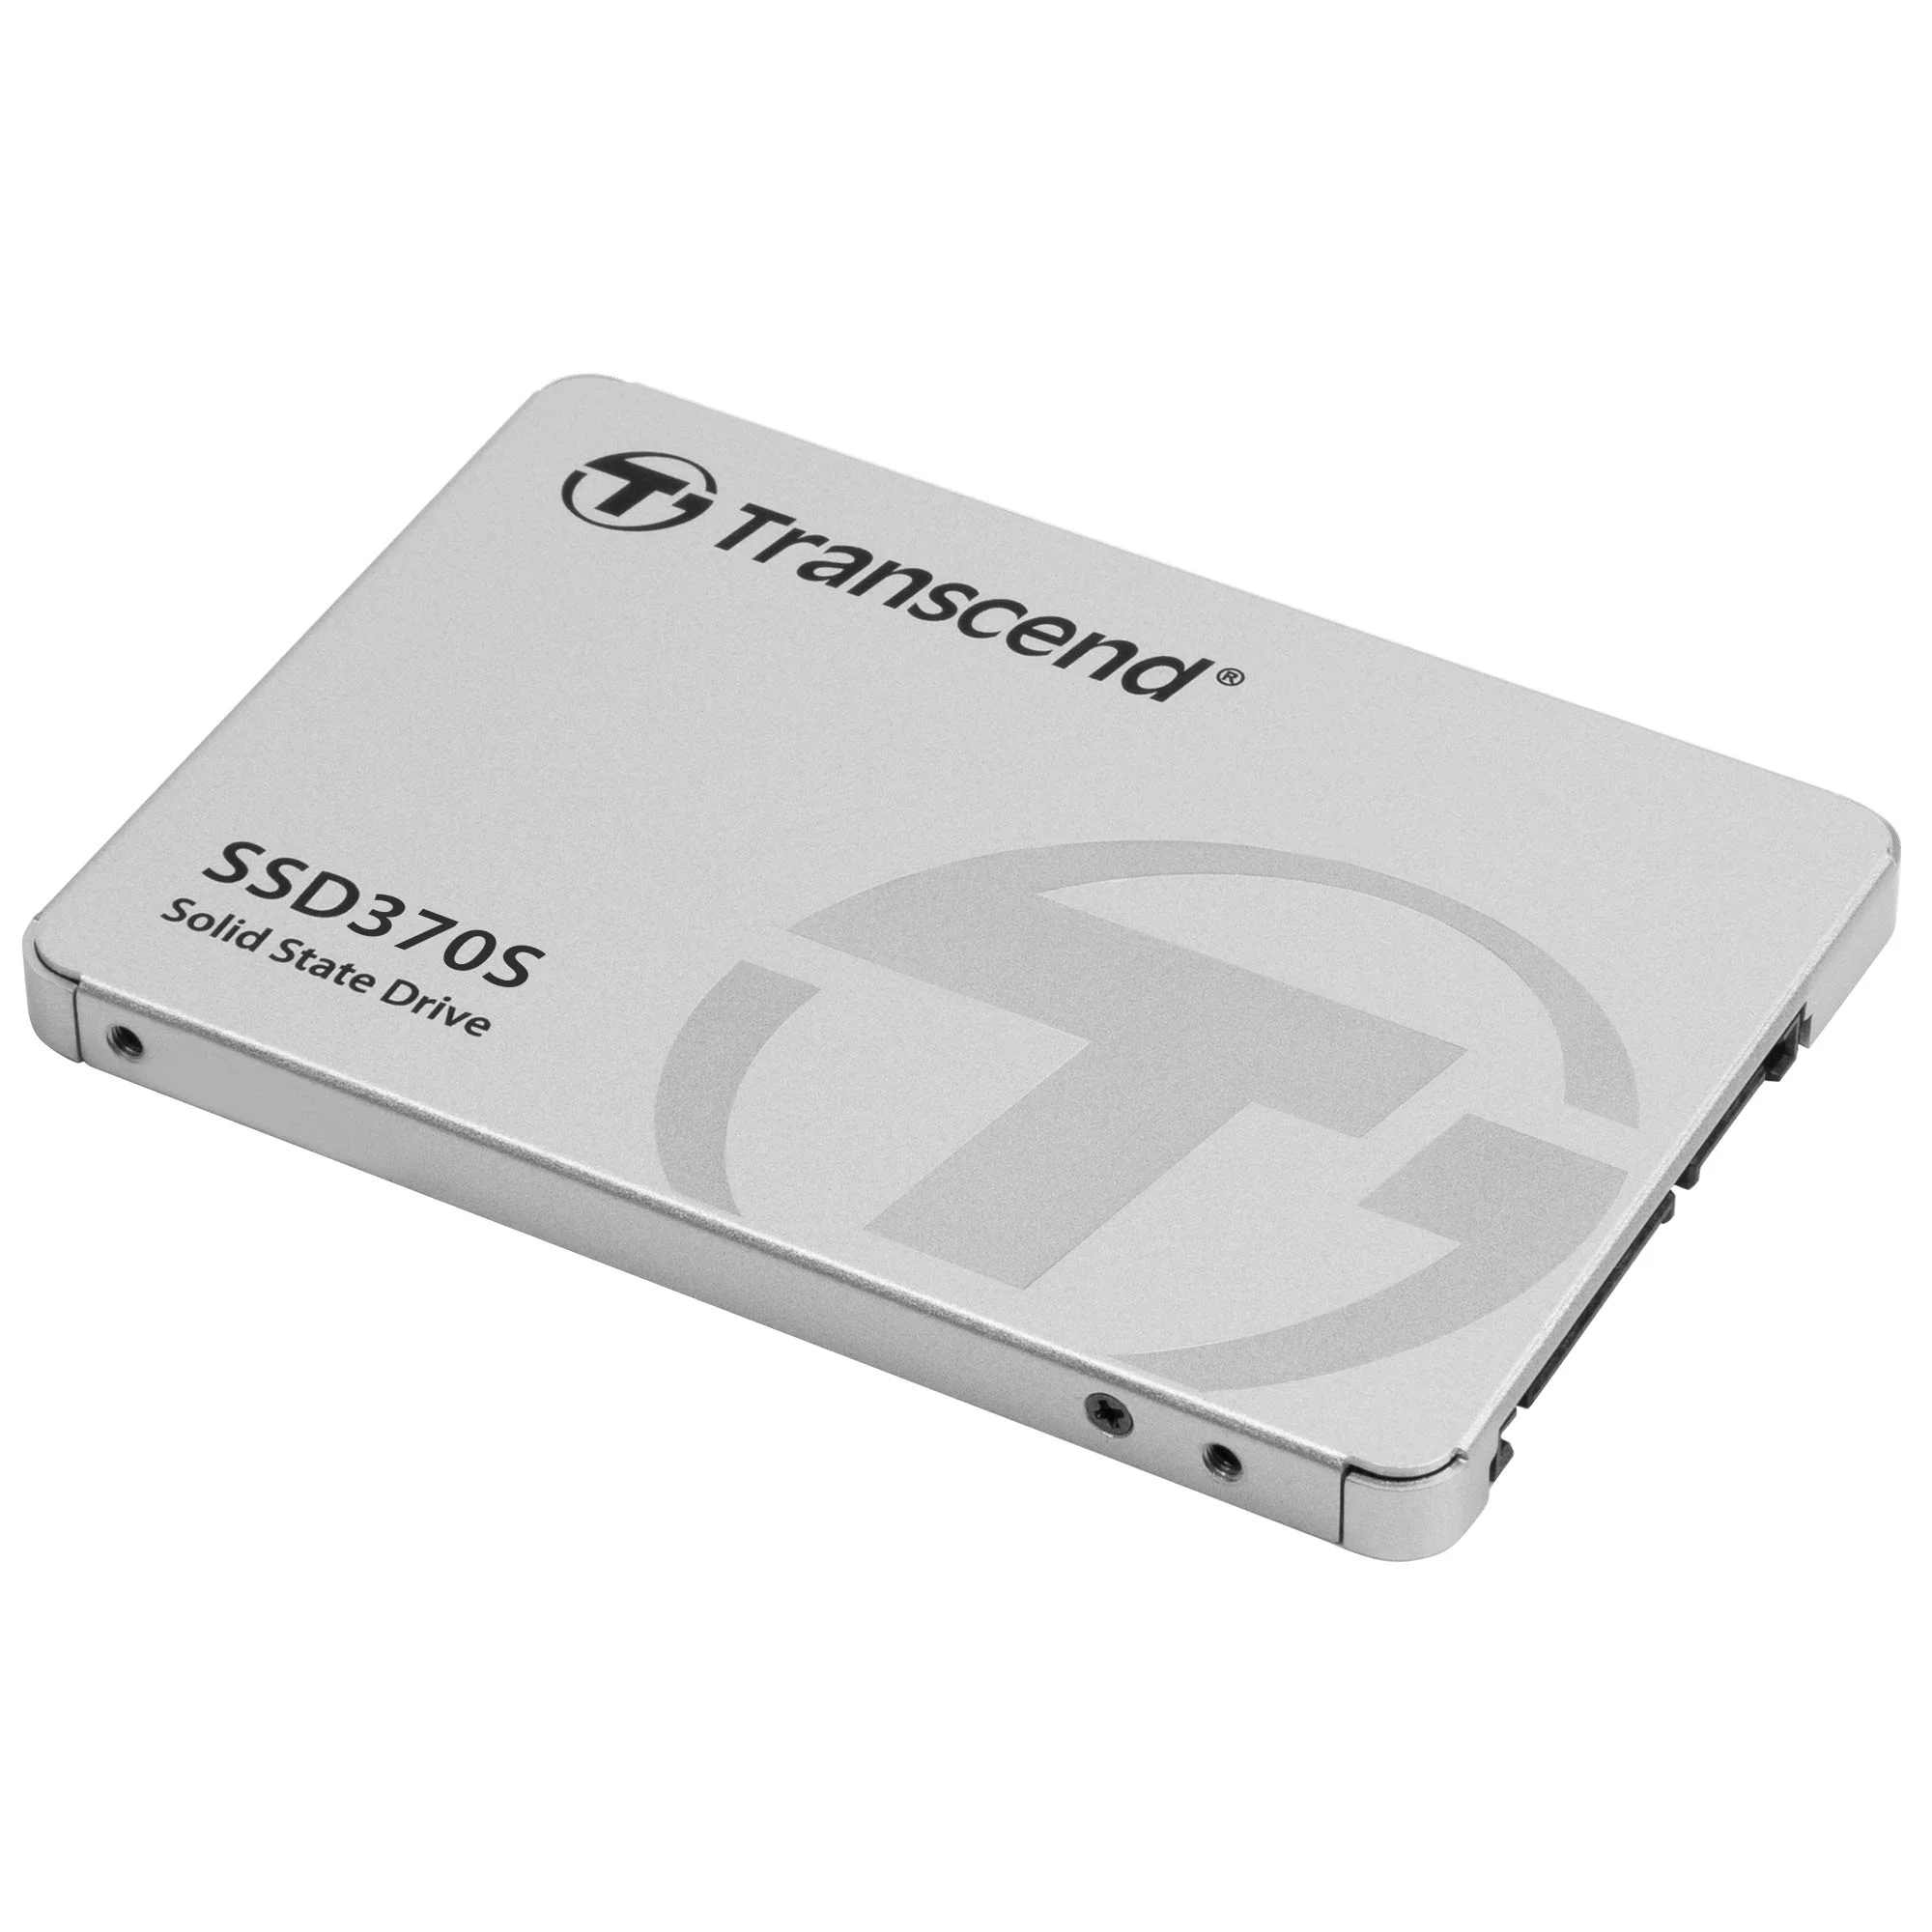 What Type Of SSD Is A Transcend 32GB 2.5 Solid State Drive